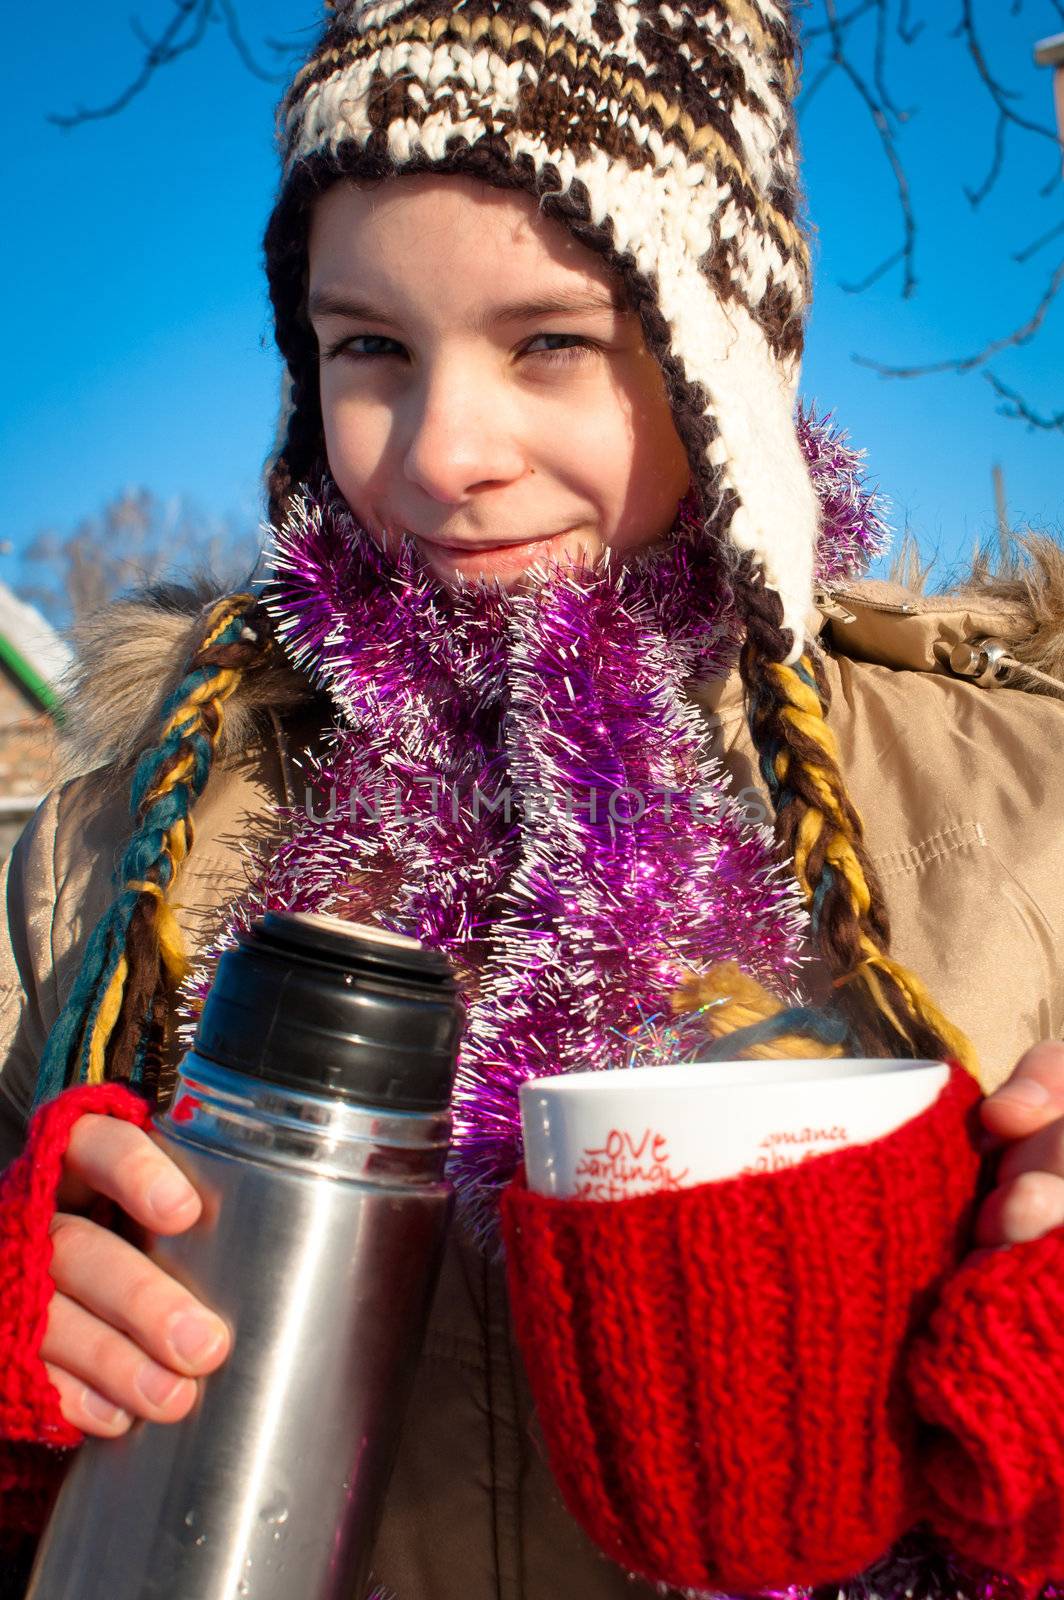 Girl holding a cup with hot drink